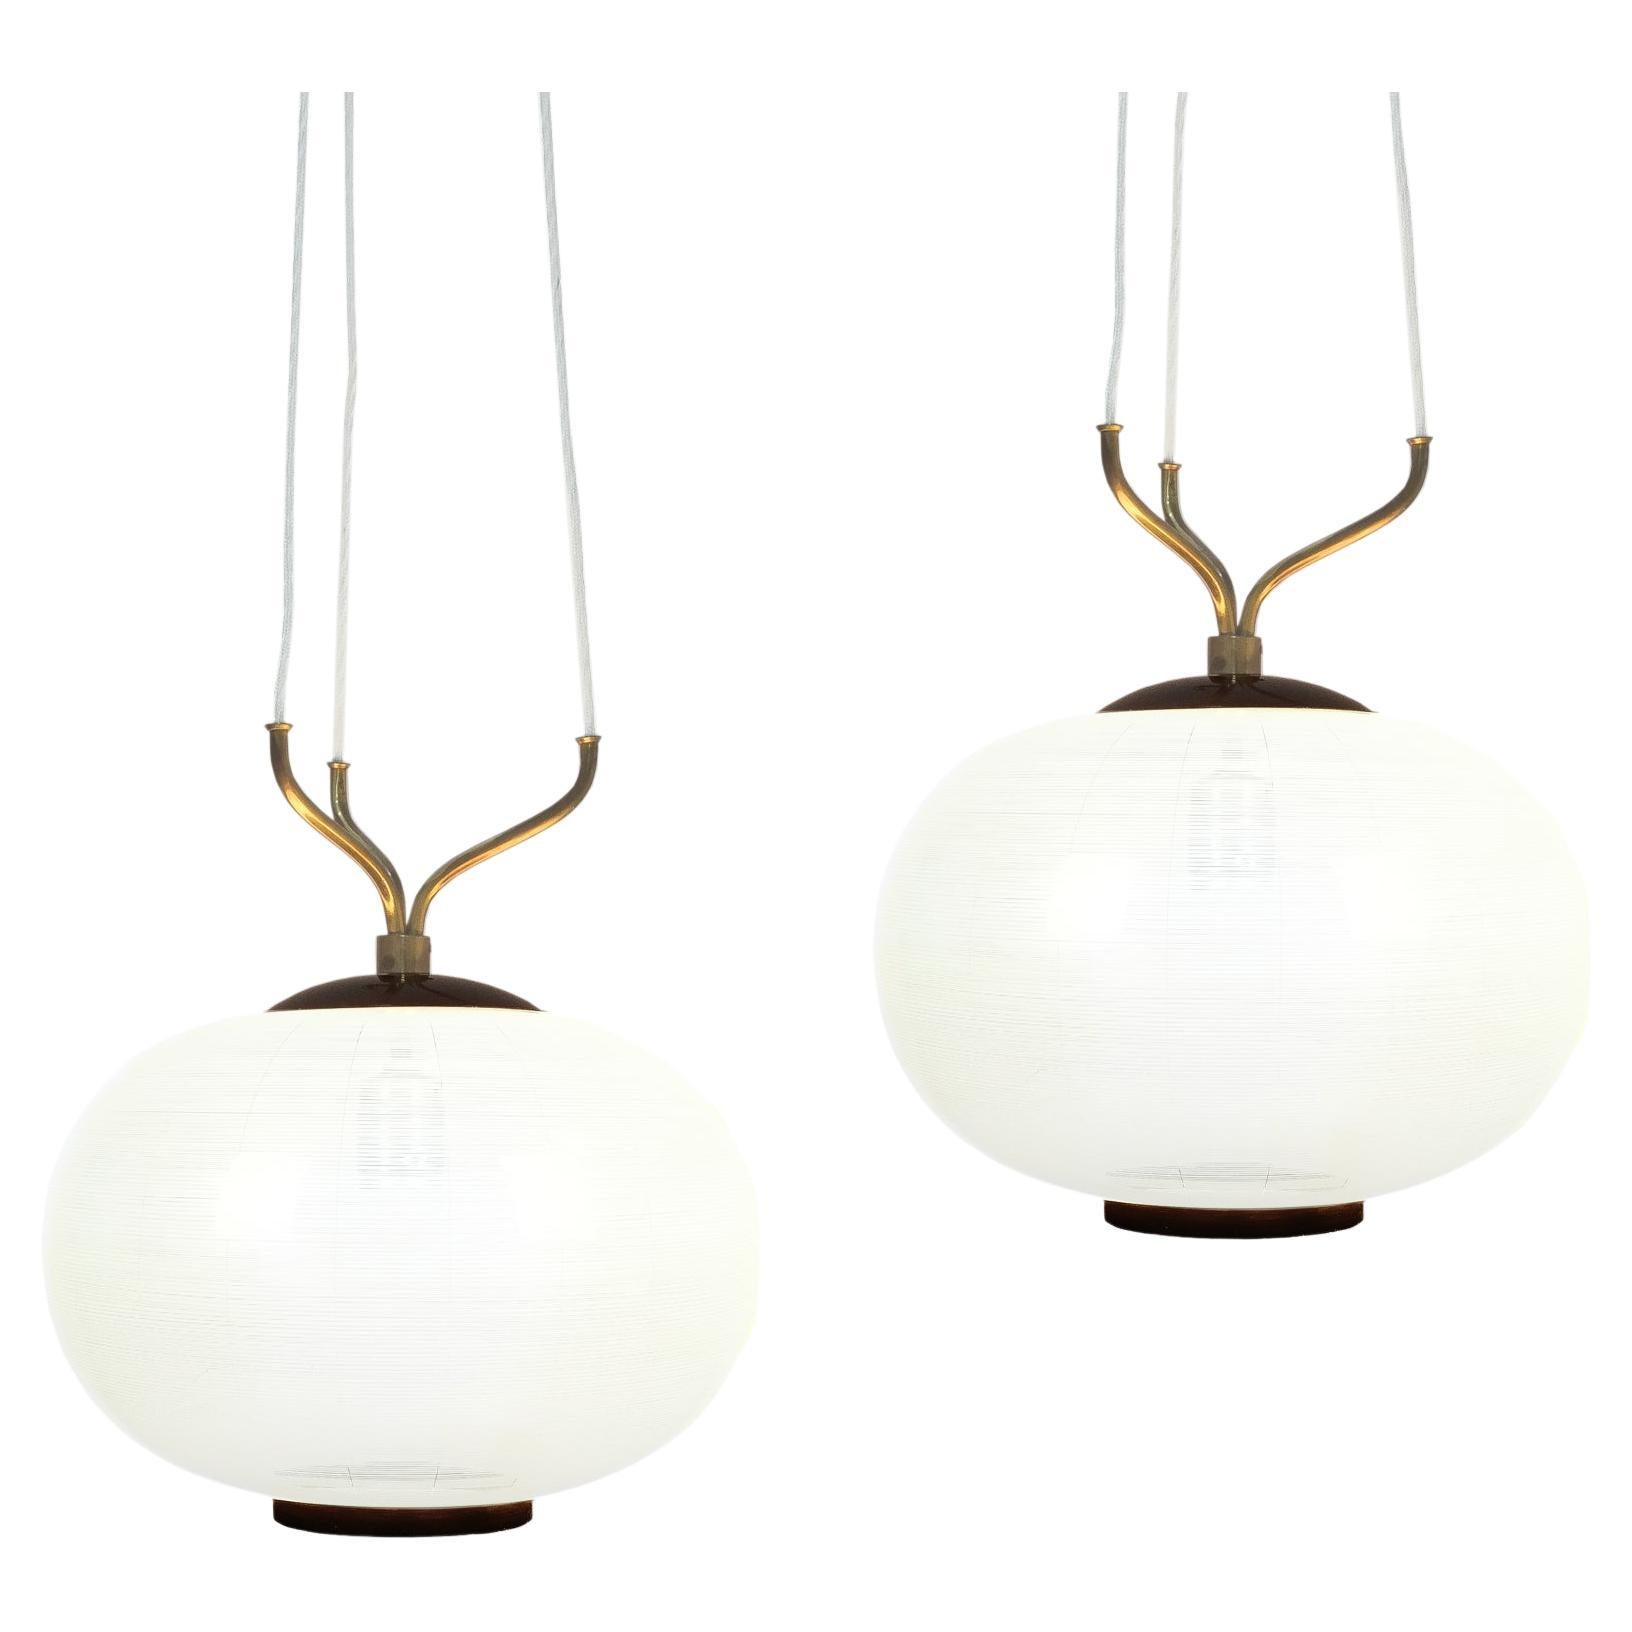 Stilnovo Satin Glass and Brass Suspension Pendant Lamps (2) by, Italy, 1950